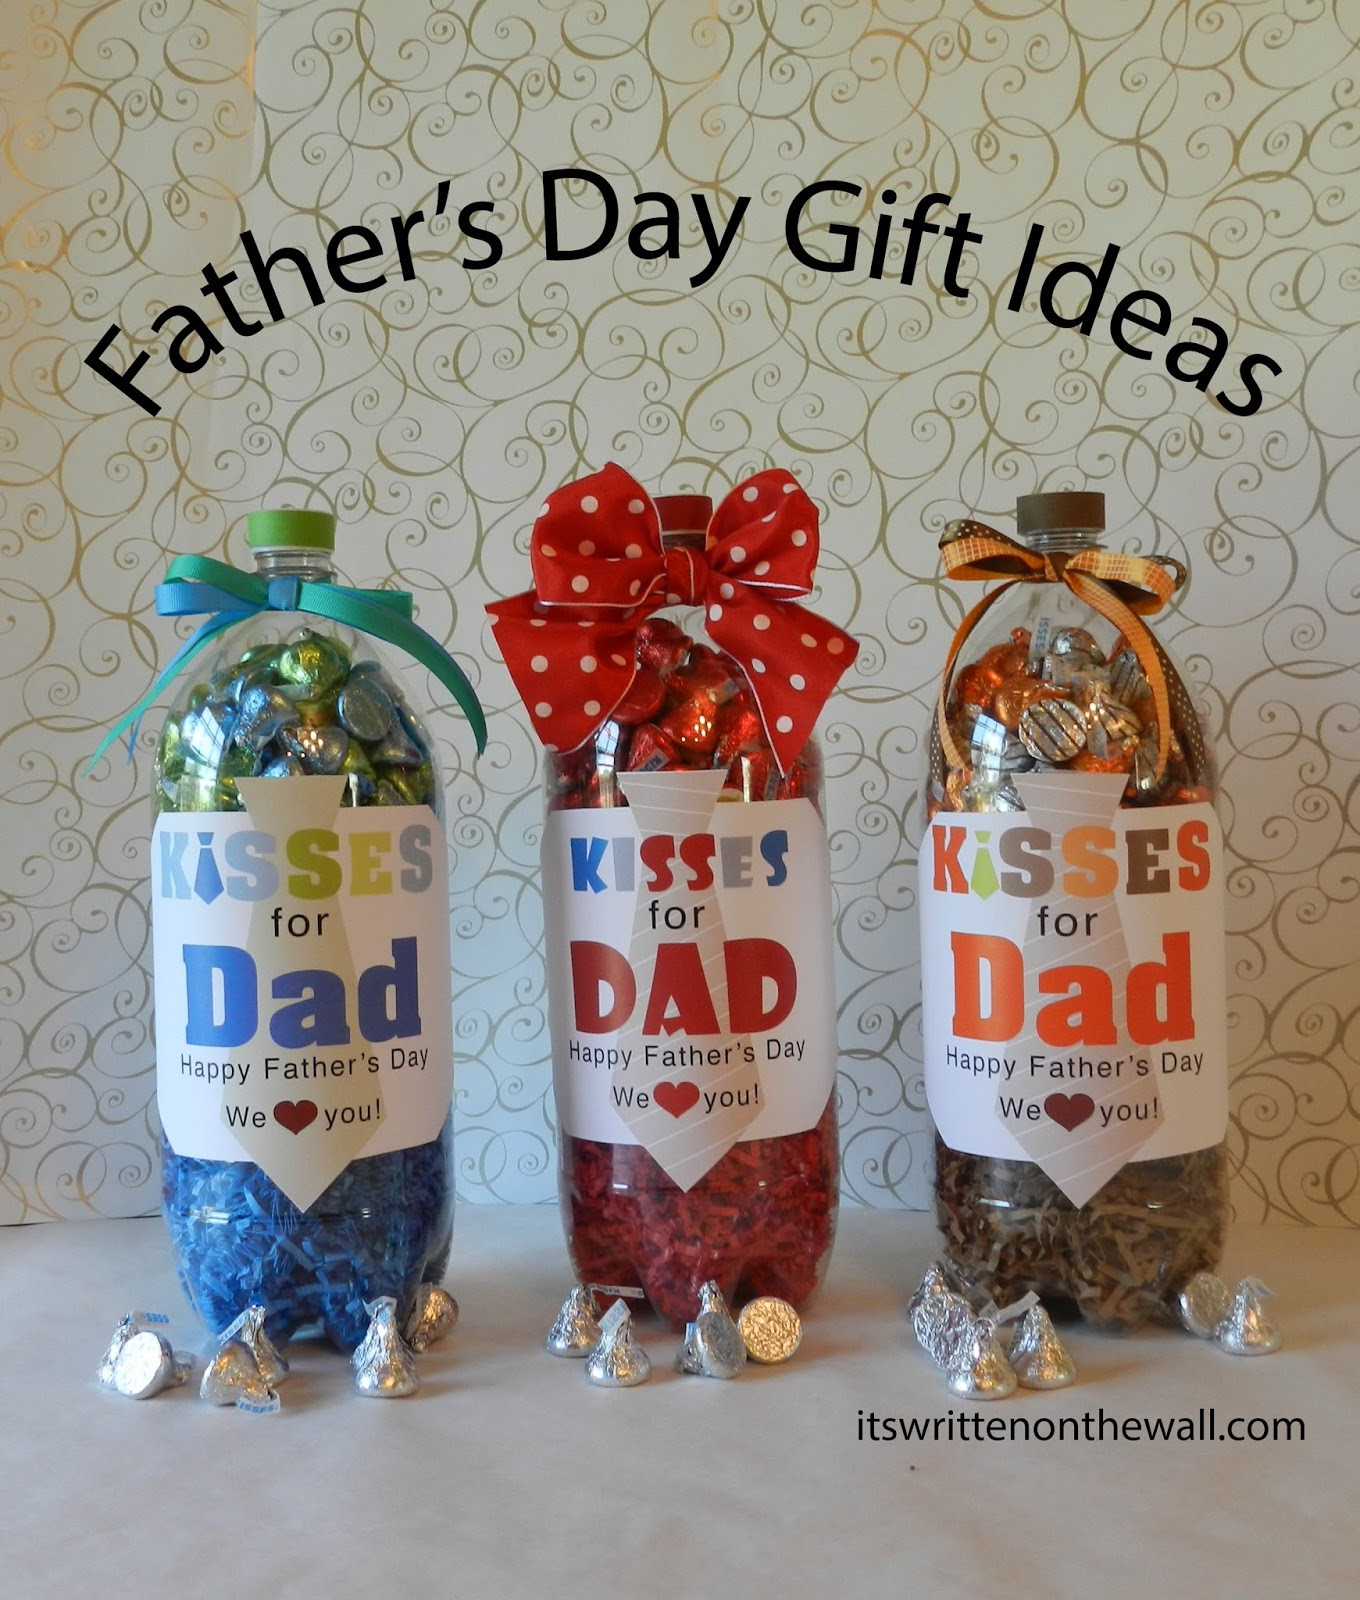 Homemade Fathers Day Gifts Ideas
 It s Written on the Wall Fathers Day Gift Ideas For the